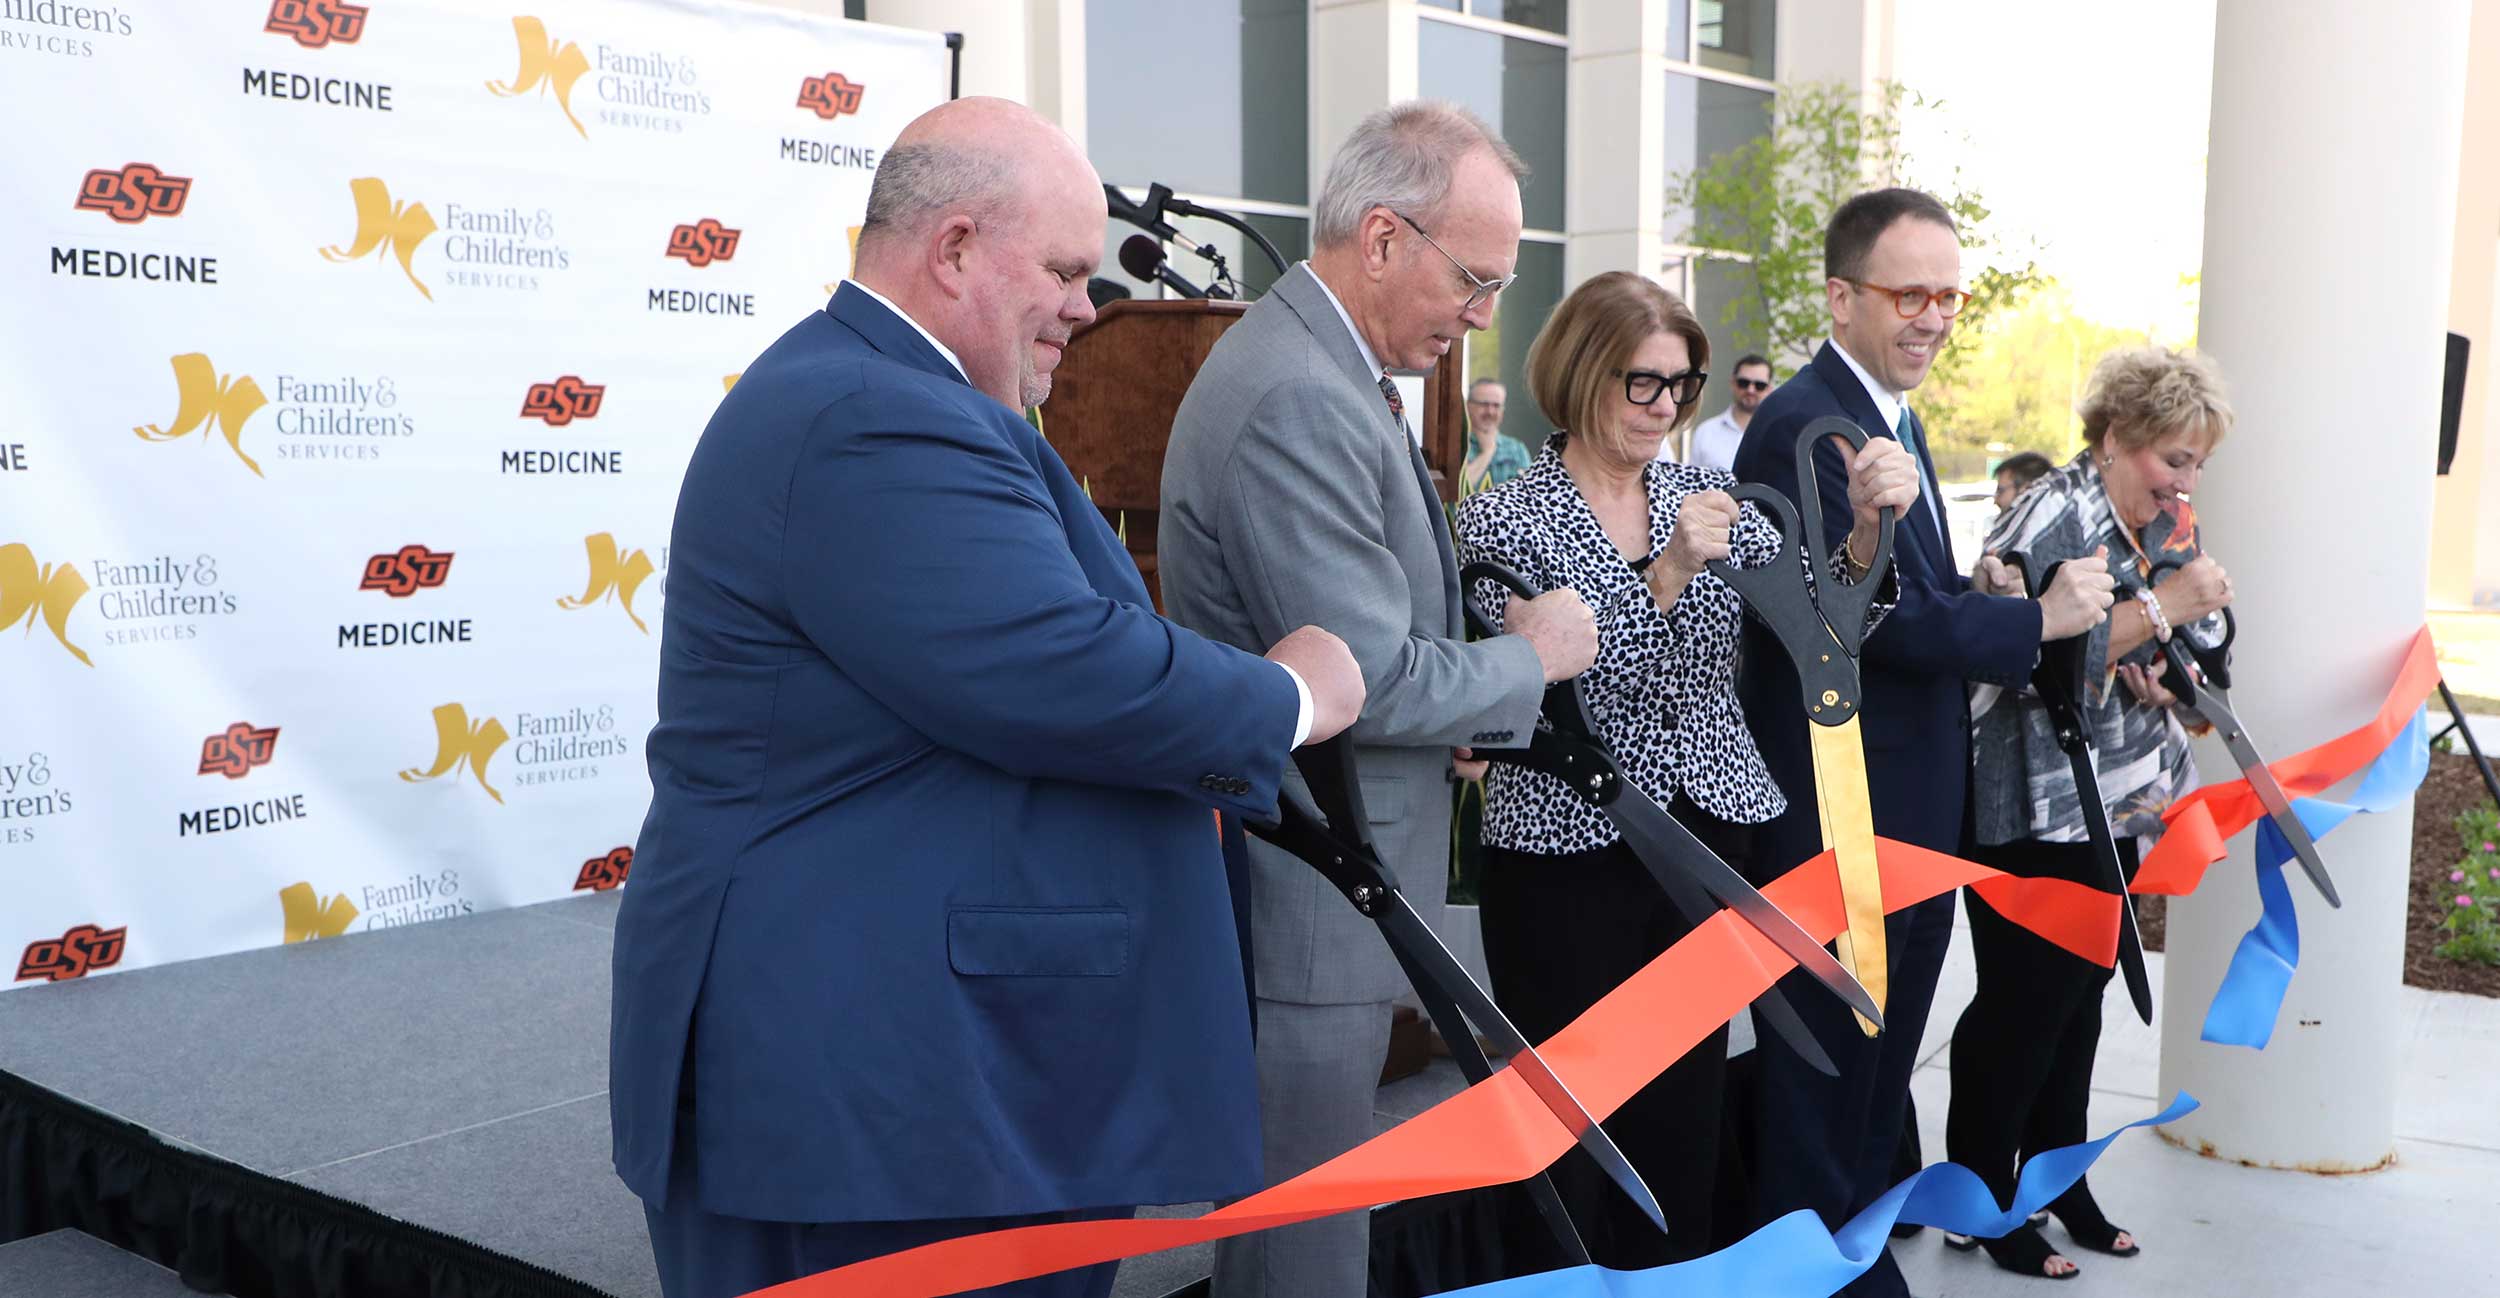 Johnny Stephens (left), President of OSU-CHS, Bill Major, Executive Director of the Anne & Henry Zarrow Foundation, Judy Kishner, Trustee from the Anne & Henry Zarrow Foundation, Tulsa Mayor G.T. Bynum and Gail Lapidus, CEO of Family & Children’s Services, take part in the ribbon-cutting for Legacy Plaza West in Tulsa on Tuesday, April 26, 2022.